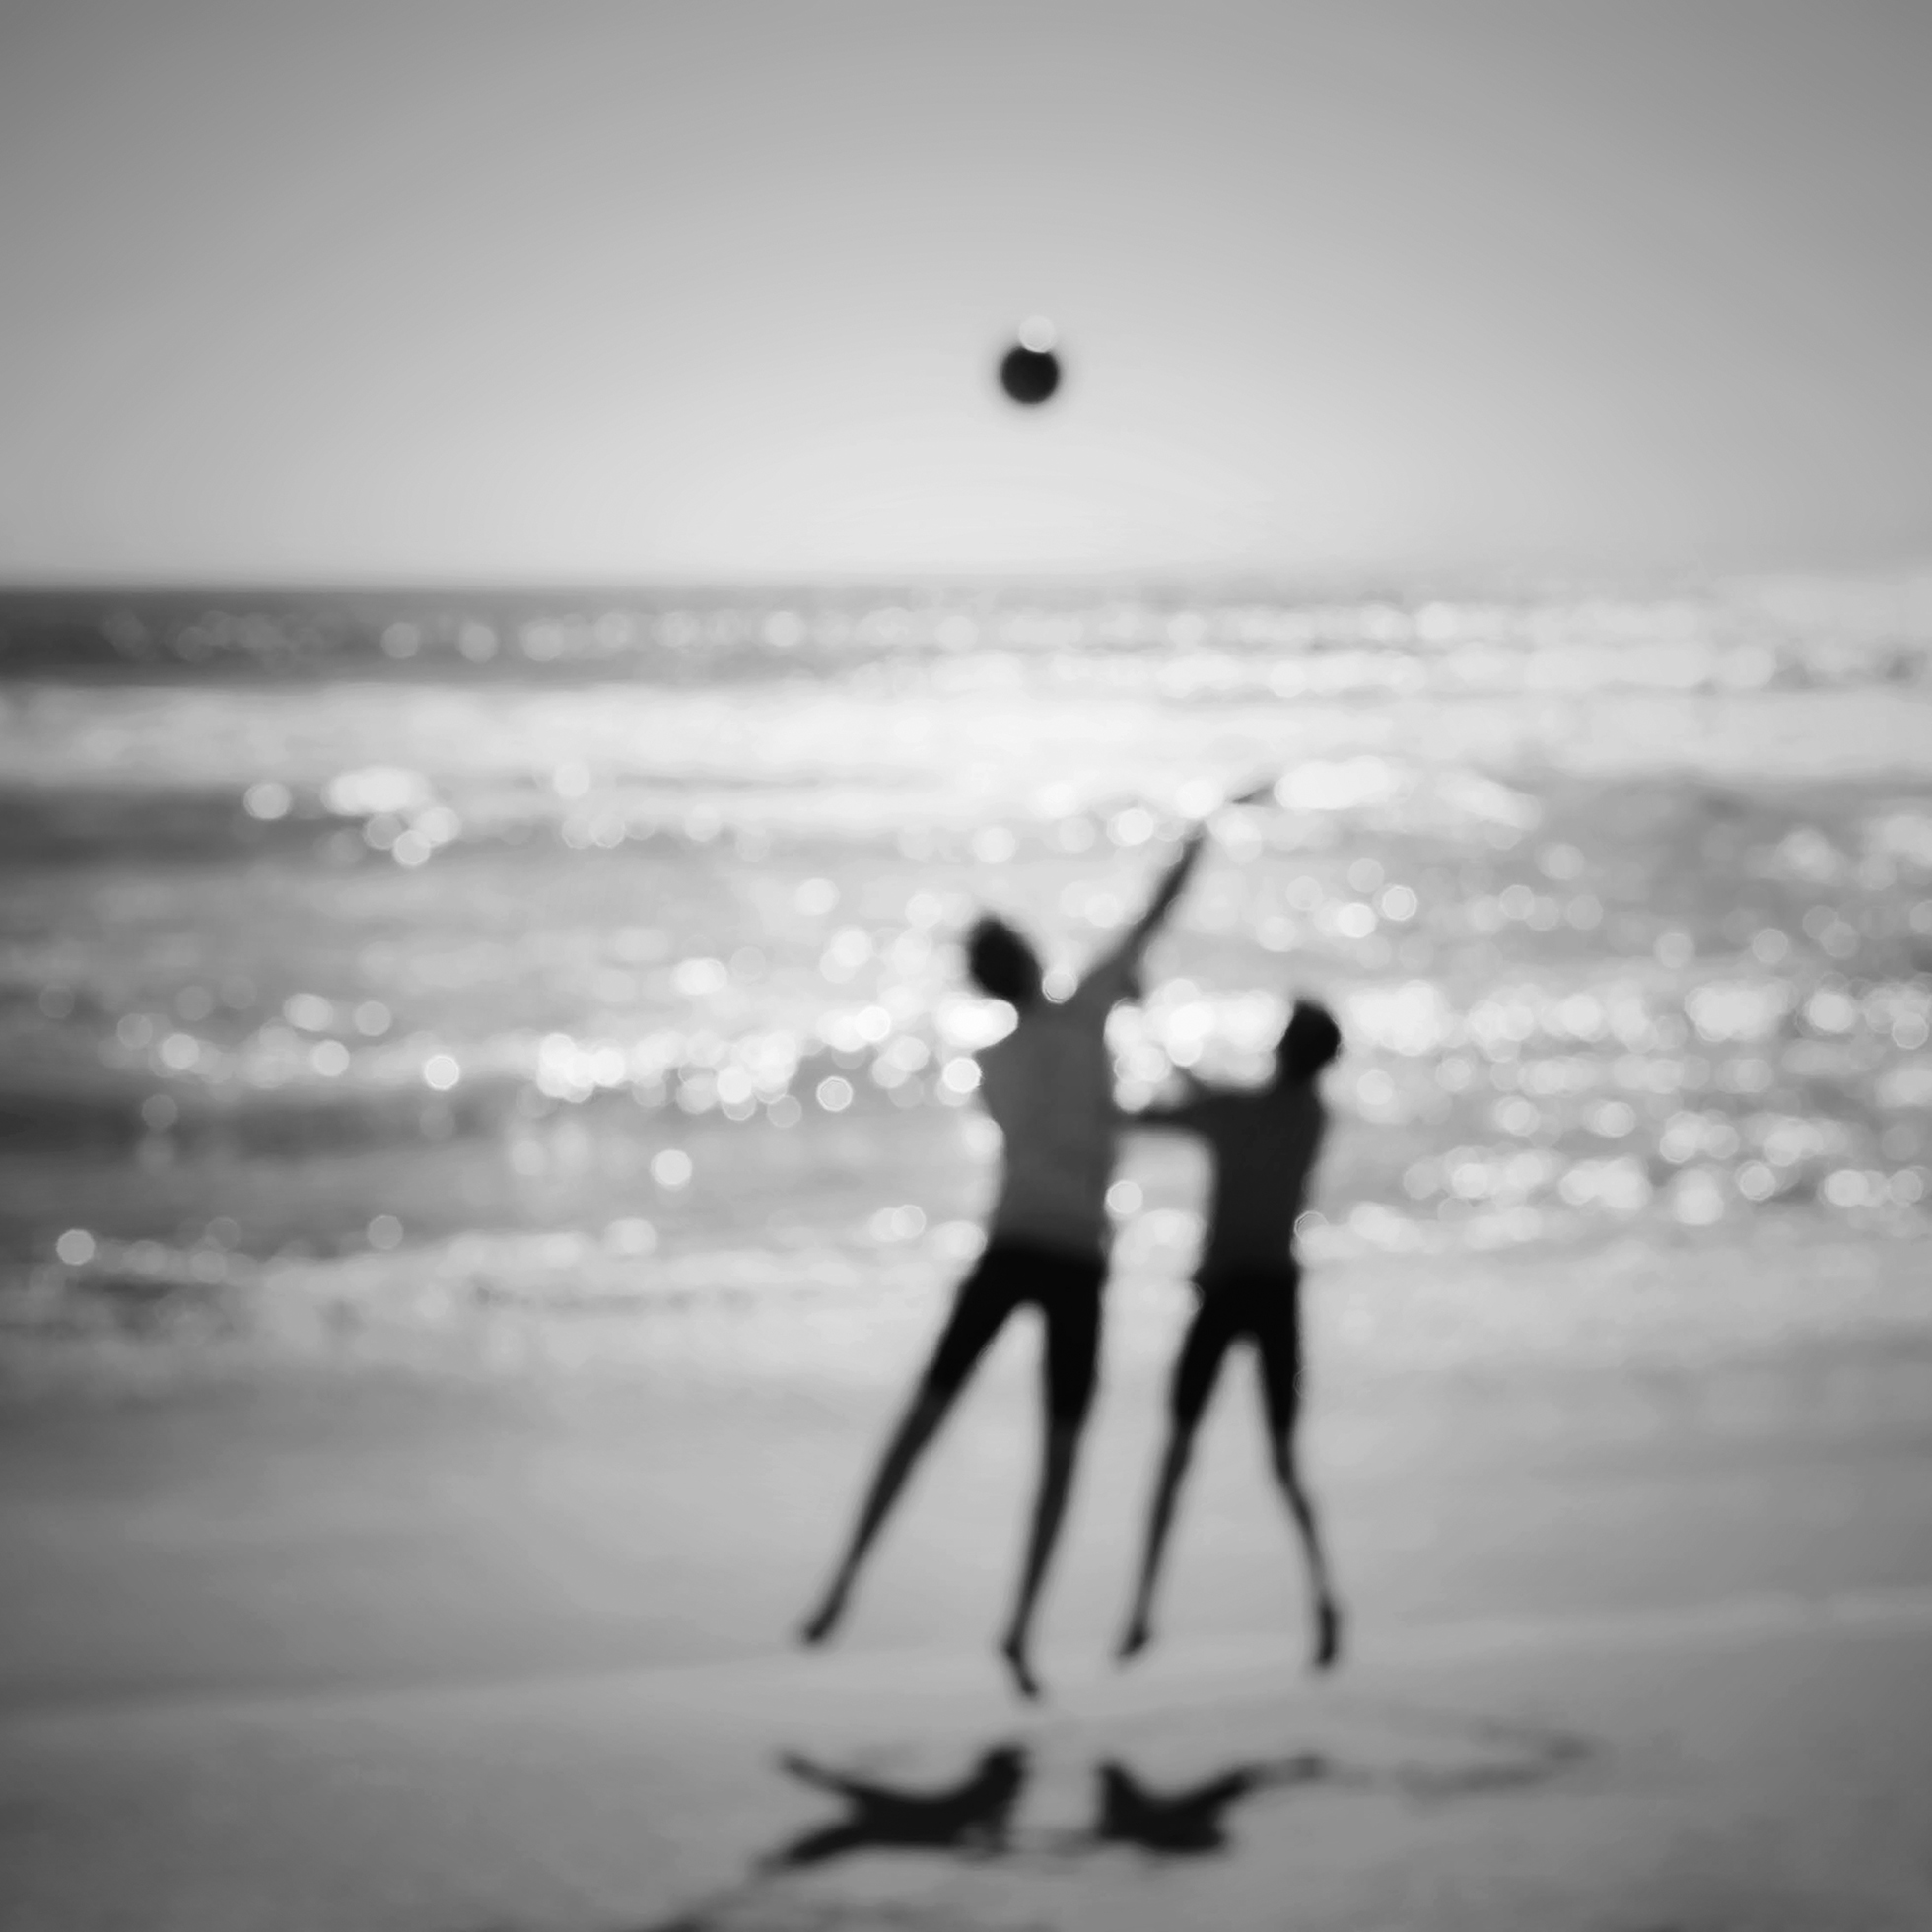 A blurry image of two boys in midair on a beach in Mexico. Both boys are positioned above the sand as the taller boy tosses a ball up in the air and the shorter boy outstretches his arms to catch it. The Pacific Ocean glistens to the horizon.